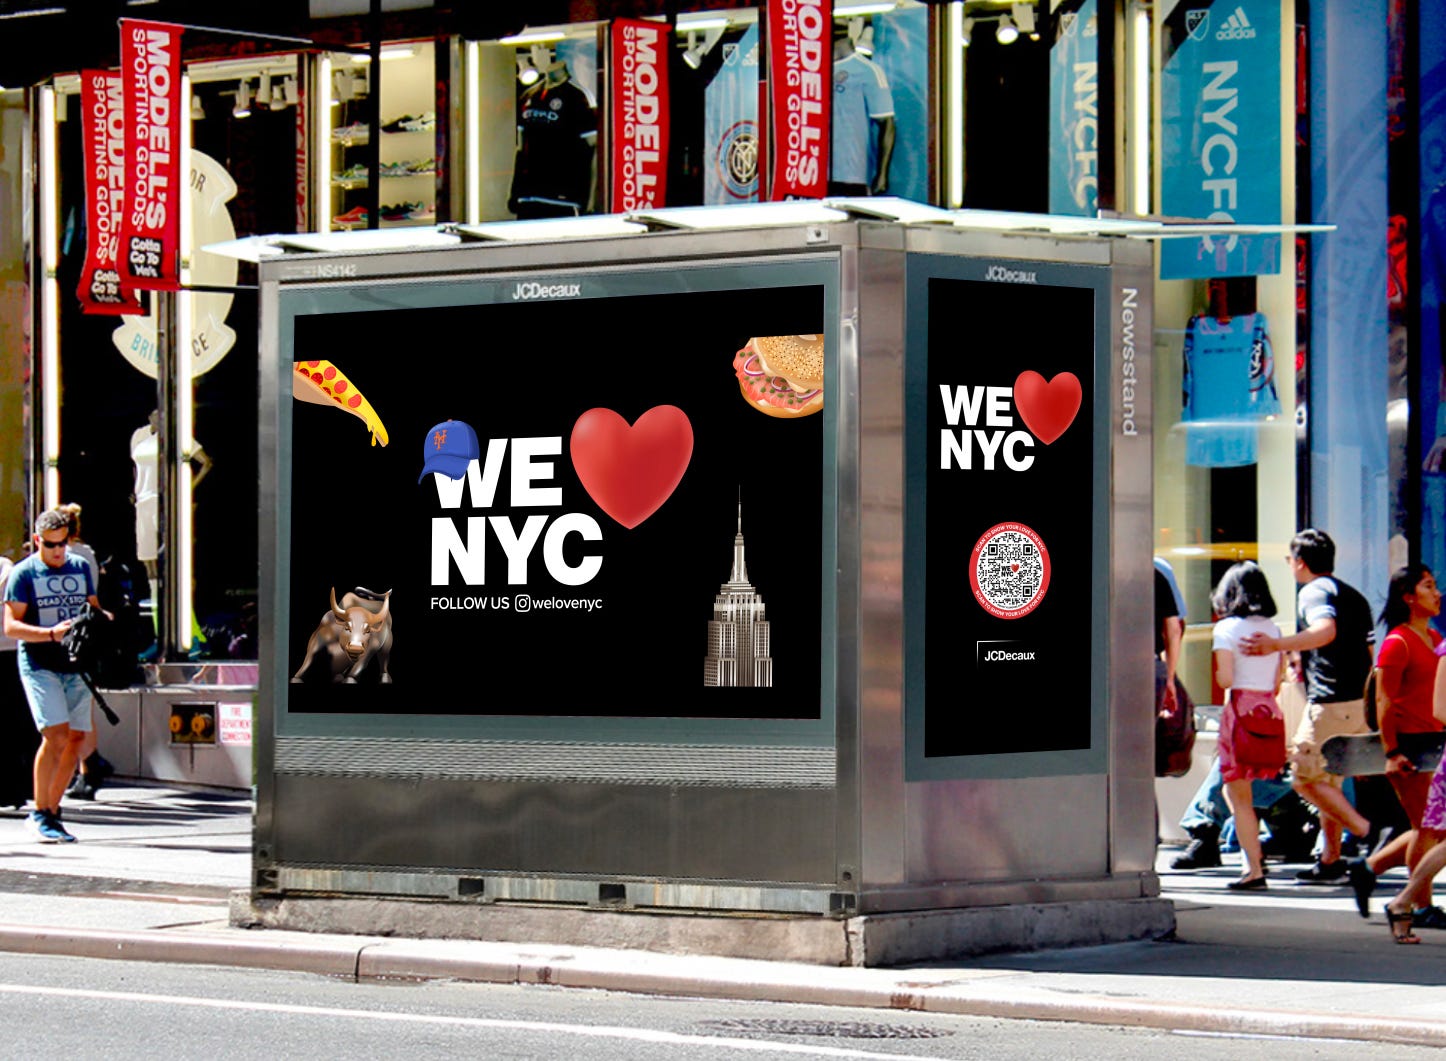 We ❤️ NYC: NYC leaders launch new motto, campaign to promote community involvement